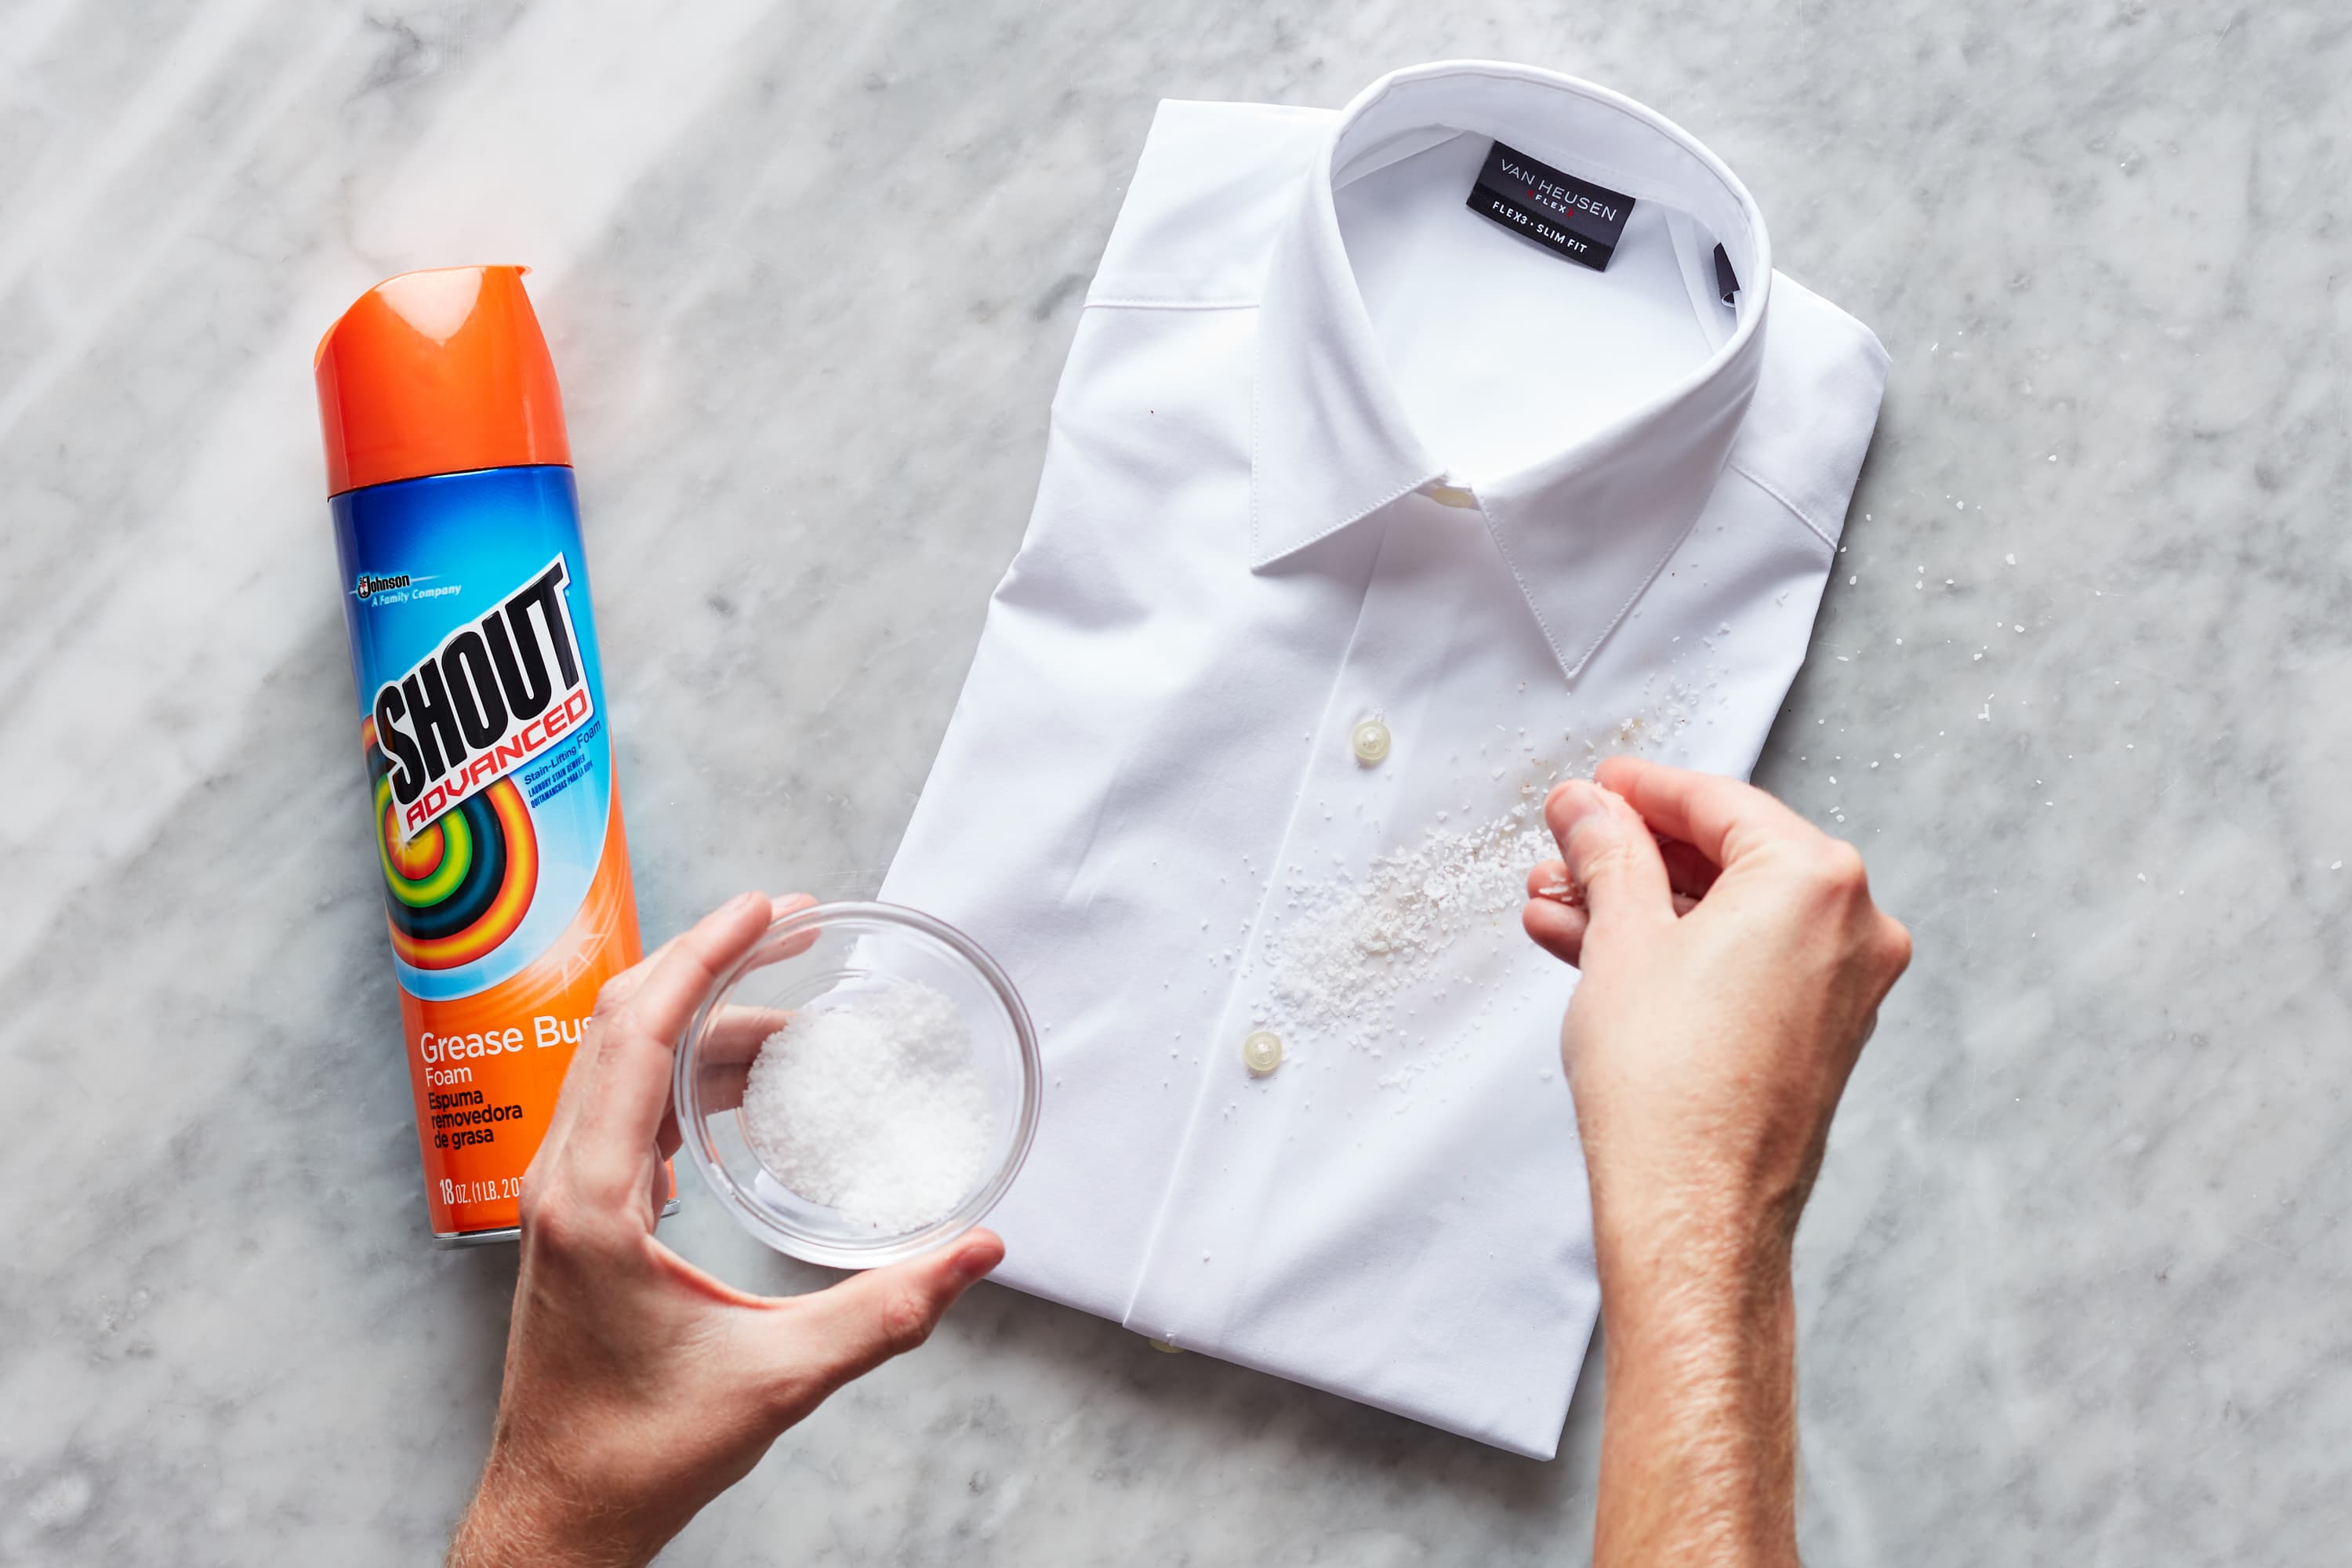 Stain Removal: How to Get Stains out of Clothes